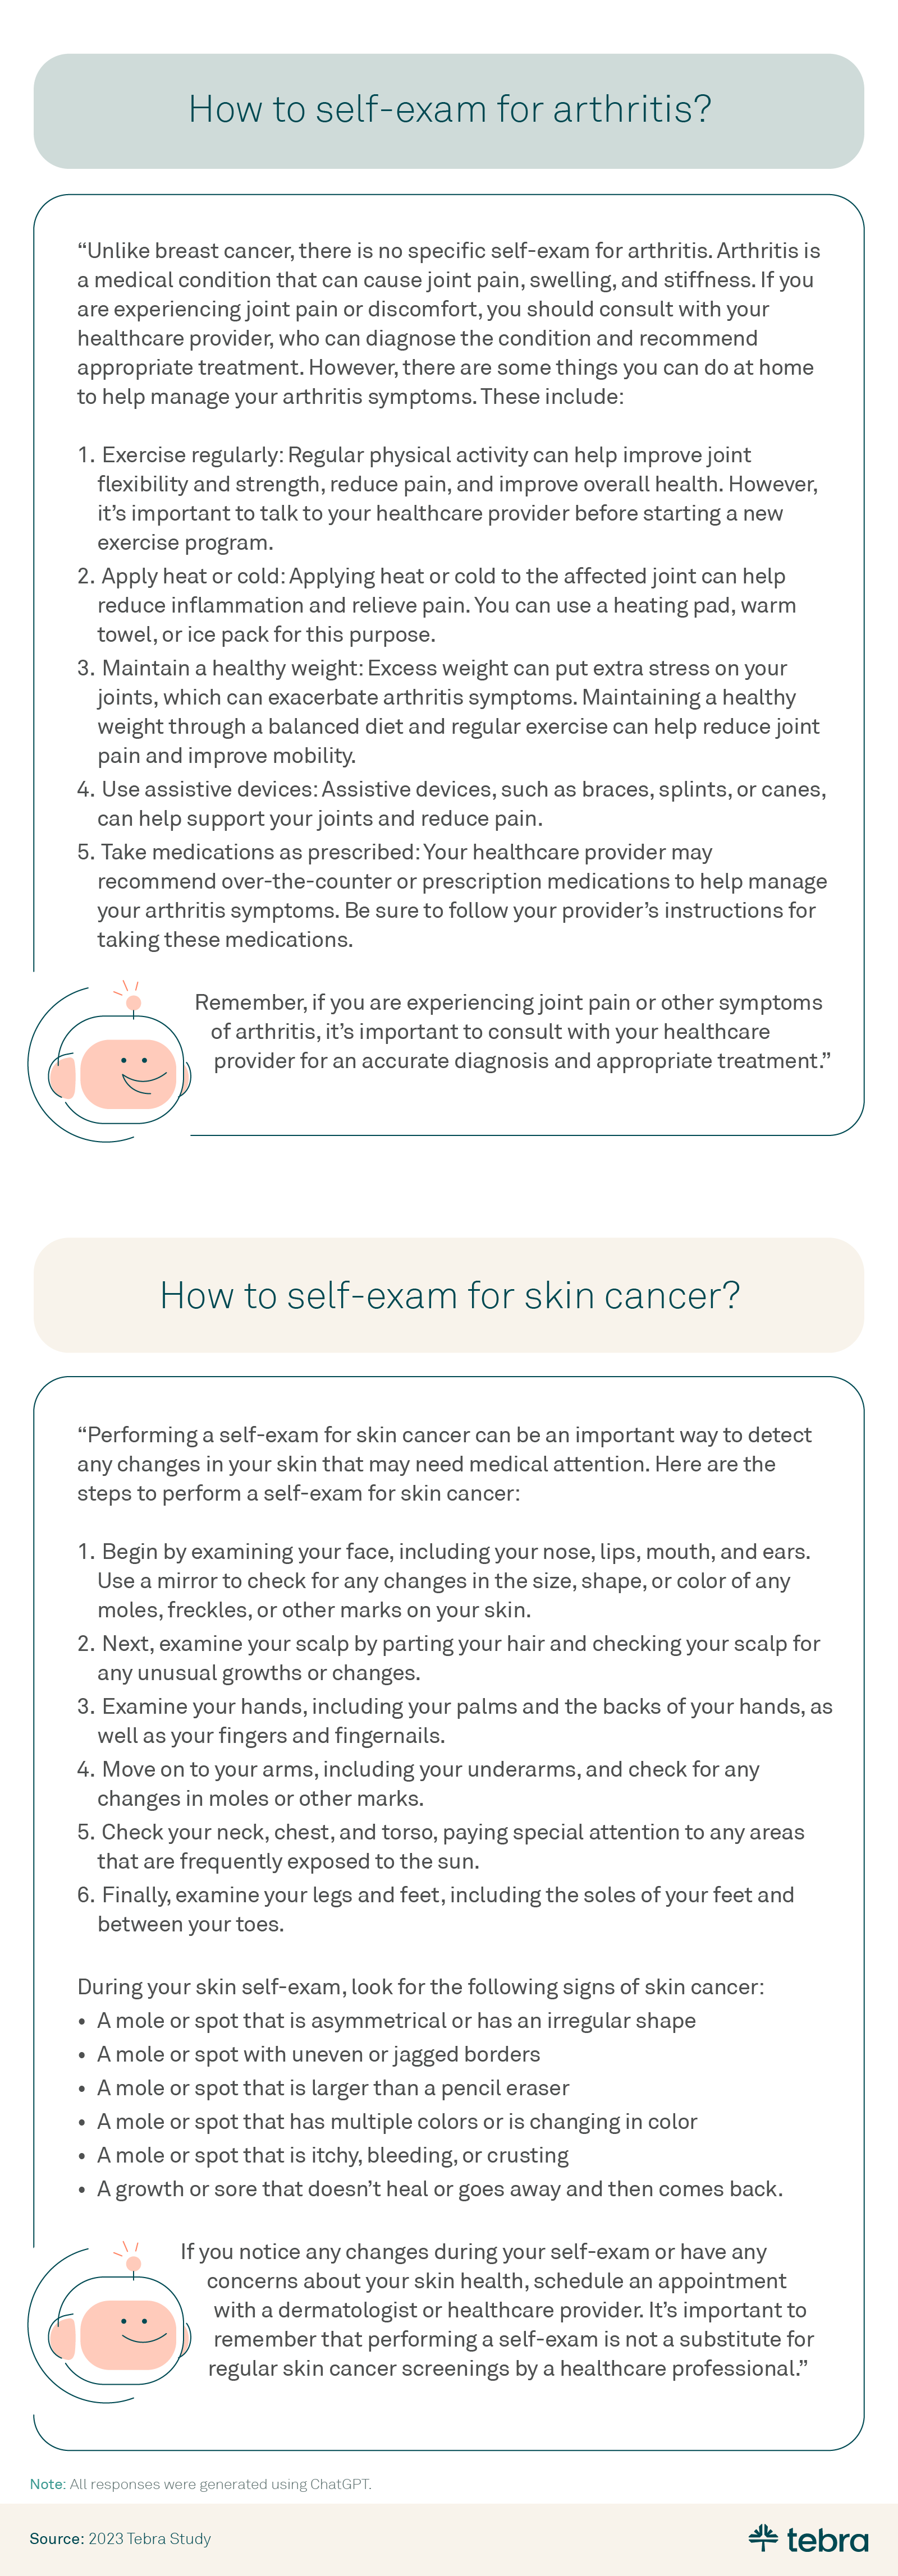 This is an infographic about Tebra research around the topic of AI in healthcare. This graphic features a response from ChatGPT around the question "How to self-exam for arthritis?". It's response was: Unlike breast cancer, there is no specific self-exam for arthritis. Arthritis is a medical condition that can cause joint pain, swelling, and stiffness. If you are experiencing joint pain or discomfort, you should consult with your healthcare provider, who can diagnose the condition and recommend appropriate treatment. However, there are some things you can do at home to help manage your arthritis symptoms. These include: Exercise regularly: Regular physical activity can help improve joint flexibility and strength, reduce pain, and improve overall health. However, it's important to talk to your healthcare provider before starting a new exercise program. Apply heat or cold: Applying heat or cold to the affected joint can help reduce inflammation and relieve pain. You can use a heating pad, warm towel, or ice pack for this purpose. Maintain a healthy weight: Excess weight can put extra stress on your joints, which can exacerbate arthritis symptoms. Maintaining a healthy weight through a balanced diet and regular exercise can help reduce joint pain and improve mobility. Use assistive devices: Assistive devices, such as braces, splints, or canes, can help support your joints and reduce pain. Take medications as prescribed: Your healthcare provider may recommend over-the-counter or prescription medications to help manage your arthritis symptoms. Be sure to follow your provider's instructions for taking these medications. Remember, if you are experiencing joint pain or other symptoms of arthritis, it's important to consult with your healthcare provider for an accurate diagnosis and appropriate treatment. This graphic also features a response from ChatGPT on the question "How to self-exam for skin cancer?". Its response was "Performing a self-exam for skin cancer can be an important way to detect any changes in your skin that may need medical attention. Here are the steps to perform a self-exam for skin cancer: Begin by examining your face, including your nose, lips, mouth, and ears. Use a mirror to check for any changes in the size, shape, or color of any moles, freckles, or other marks on your skin. Next, examine your scalp by parting your hair and checking your scalp for any unusual growths or changes. Examine your hands, including your palms and the backs of your hands, as well as your fingers and fingernails. Move on to your arms, including your underarms, and check for any changes in moles or other marks. Check your neck, chest, and torso, paying special attention to any areas that are frequently exposed to the sun. Finally, examine your legs and feet, including the soles of your feet and between your toes. During your skin self-exam, look for the following signs of skin cancer: A mole or spot that is asymmetrical or has an irregular shape A mole or spot with uneven or jagged borders A mole or spot that is larger than a pencil eraser A mole or spot that has multiple colors or is changing in color A mole or spot that is itchy, bleeding, or crusting A growth or sore that doesn't heal or goes away and then comes back. If you notice any changes during your self-exam or have any concerns about your skin health, schedule an appointment with a dermatologist or healthcare provider. It's important to remember that performing a self-exam is not a substitute for regular skin cancer screenings by a healthcare professional."